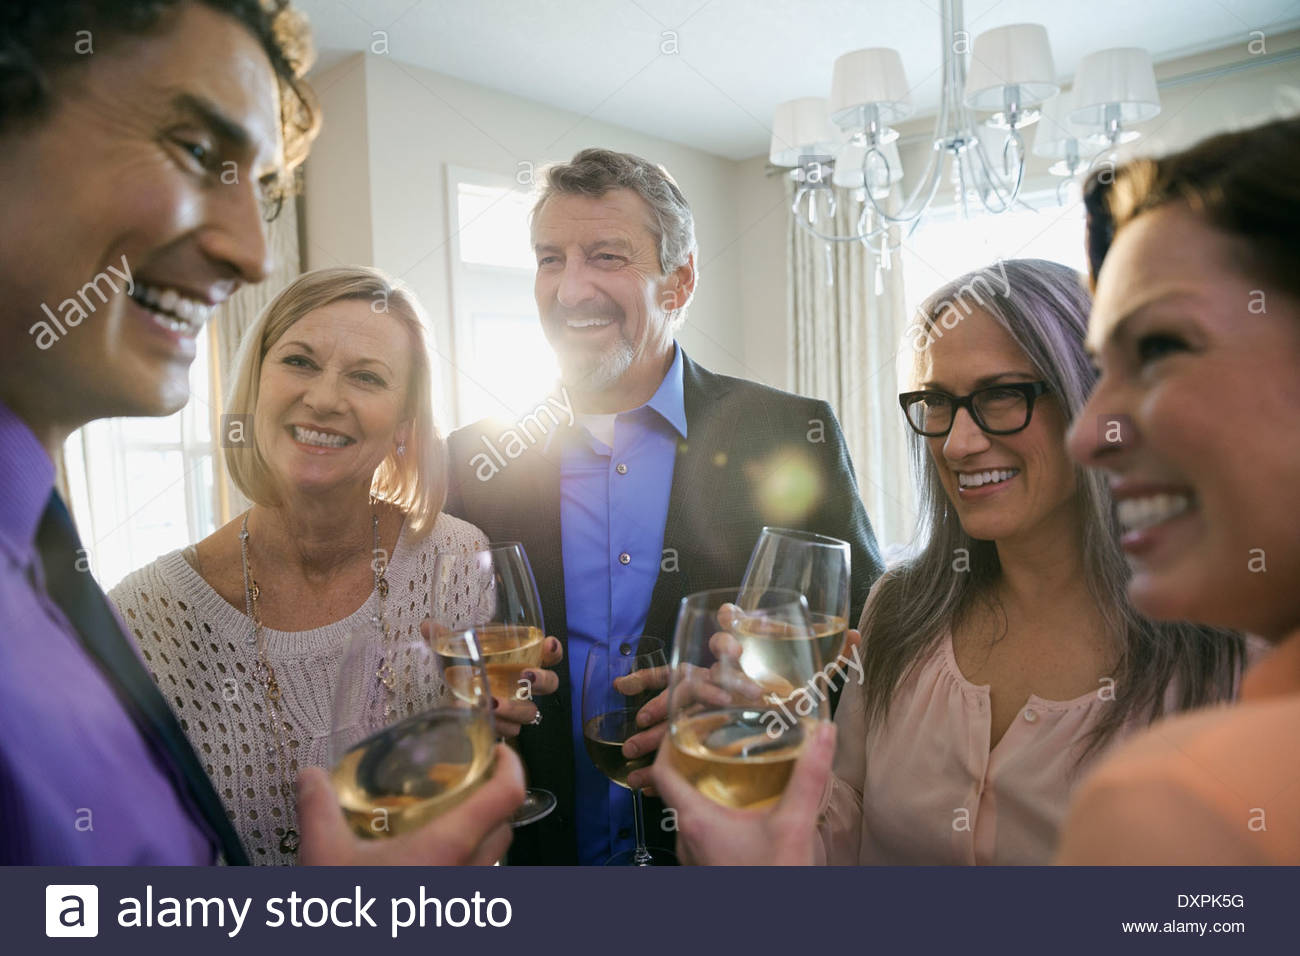 Cheerful family and friends enjoying drinks at party Stock Photo